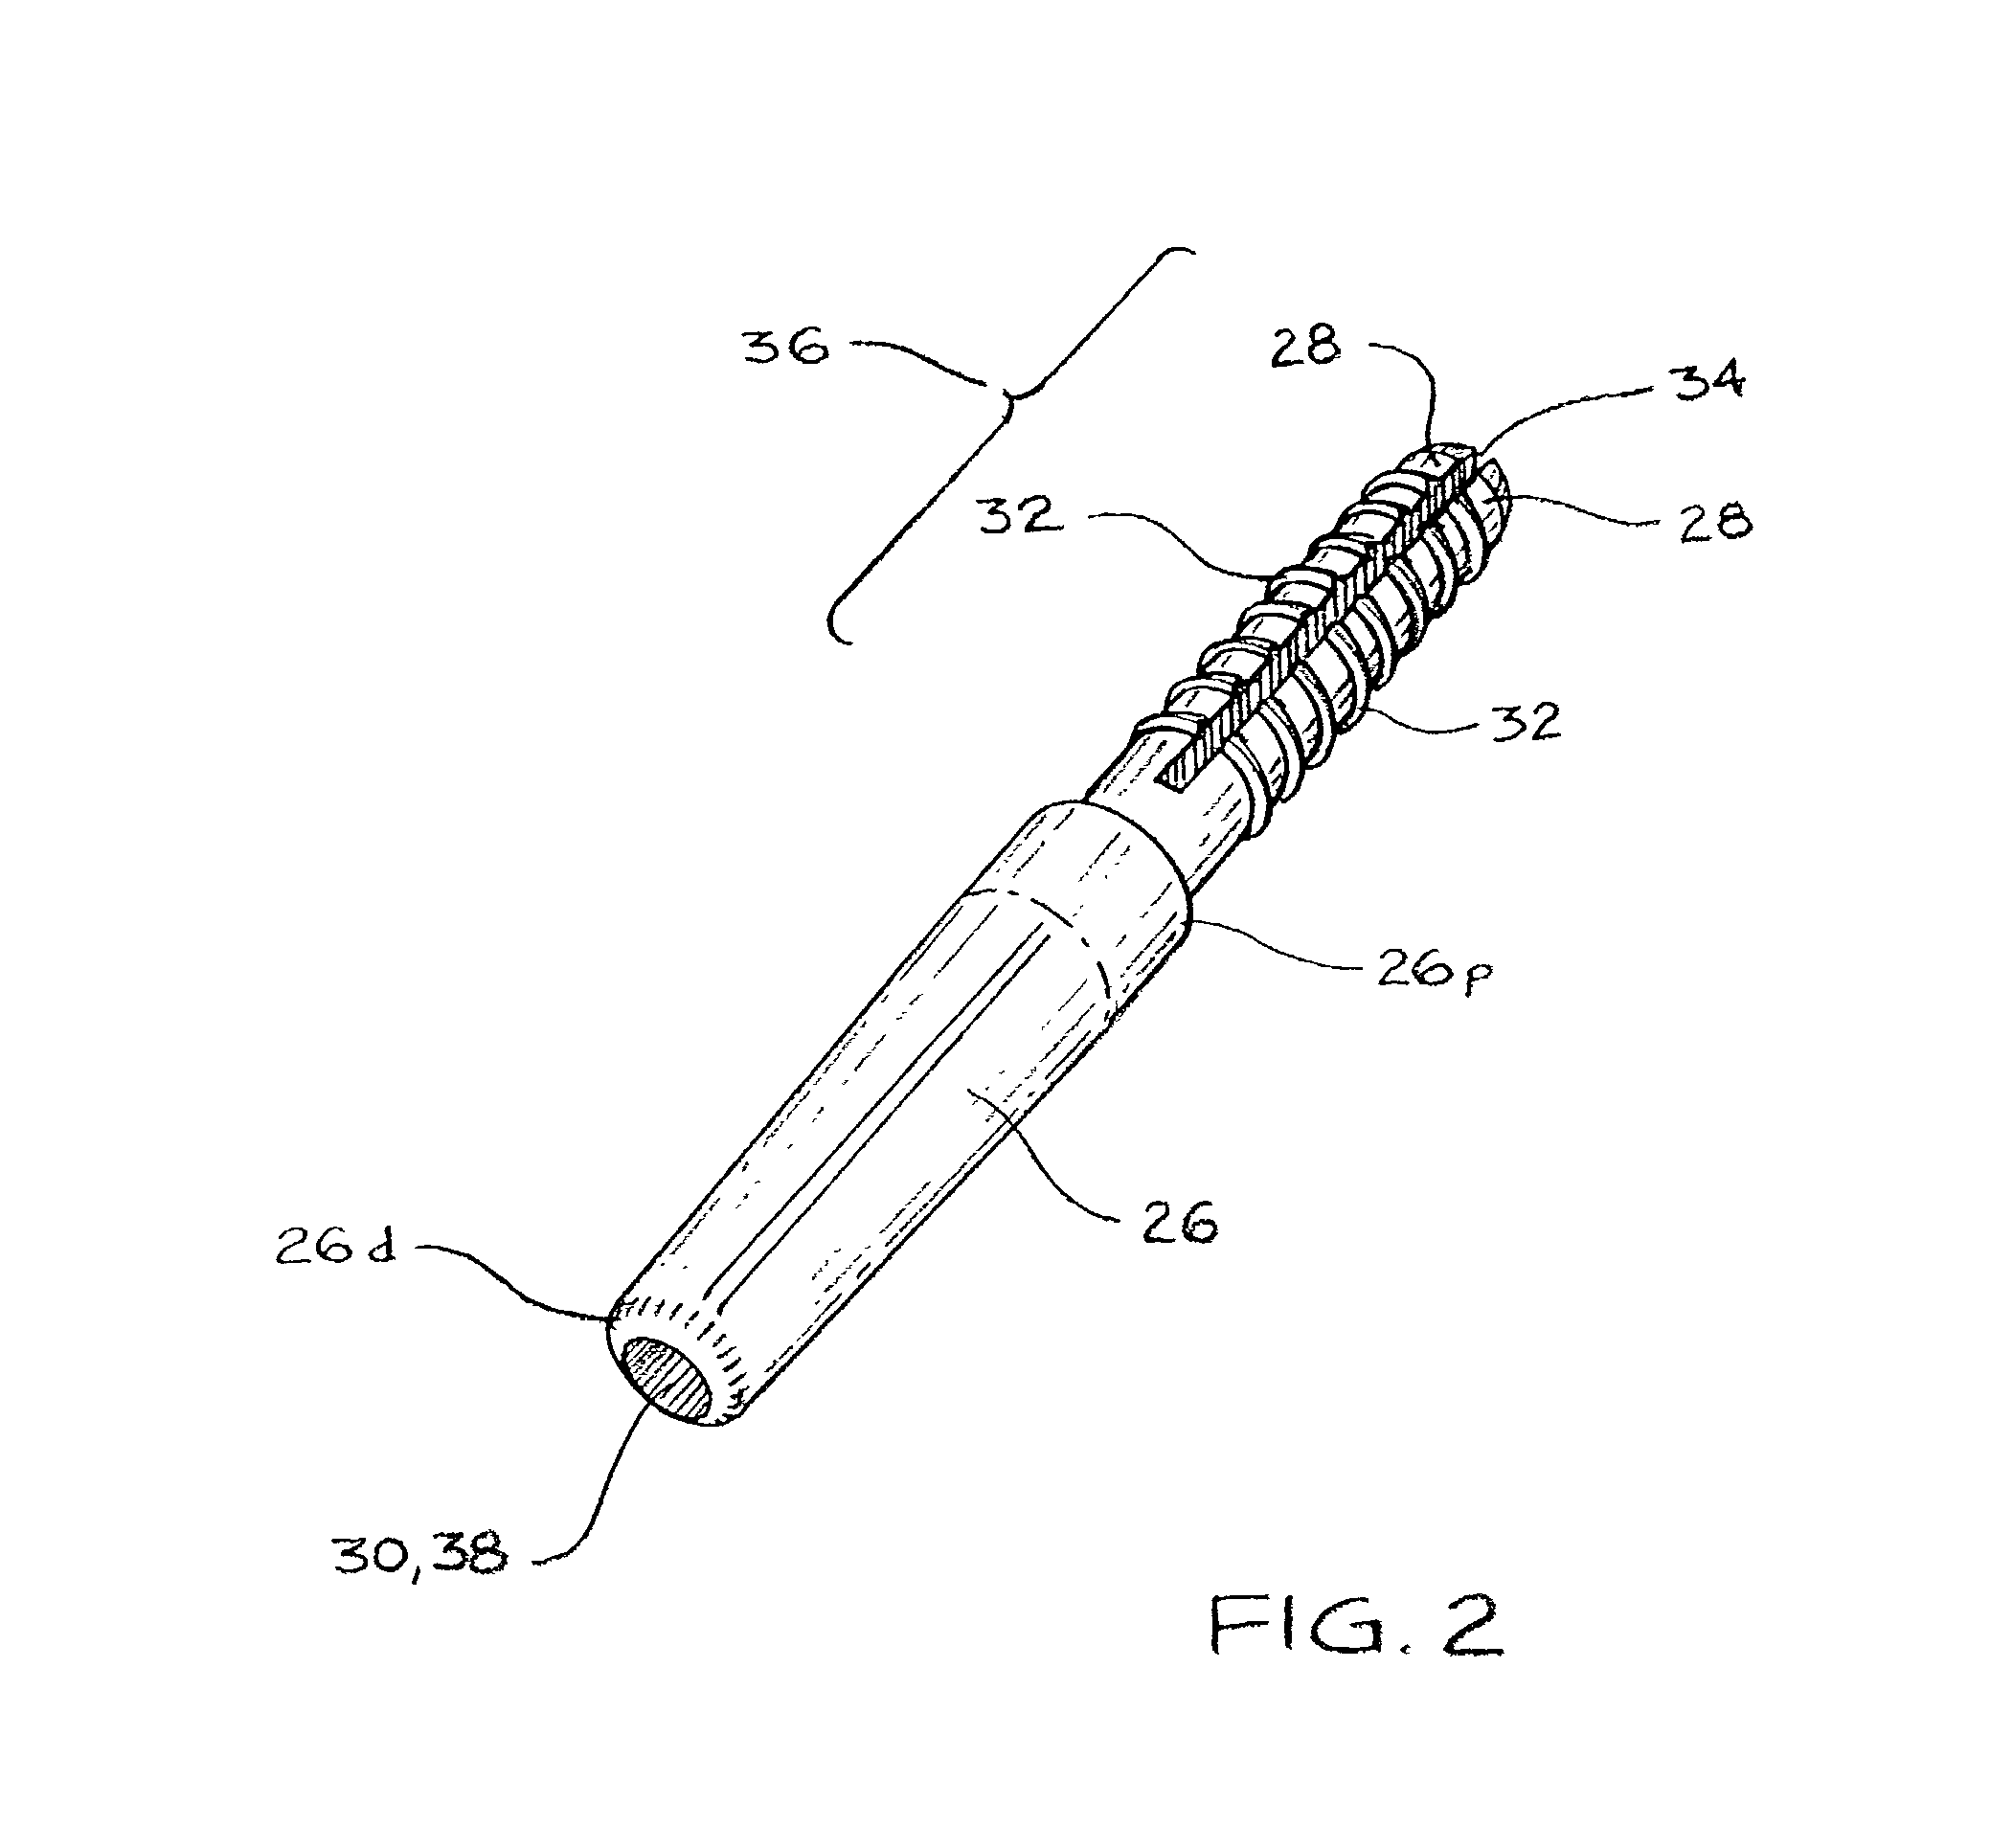 Apparatus and method for reverse tunneling a multi-lumen catheter in a patient